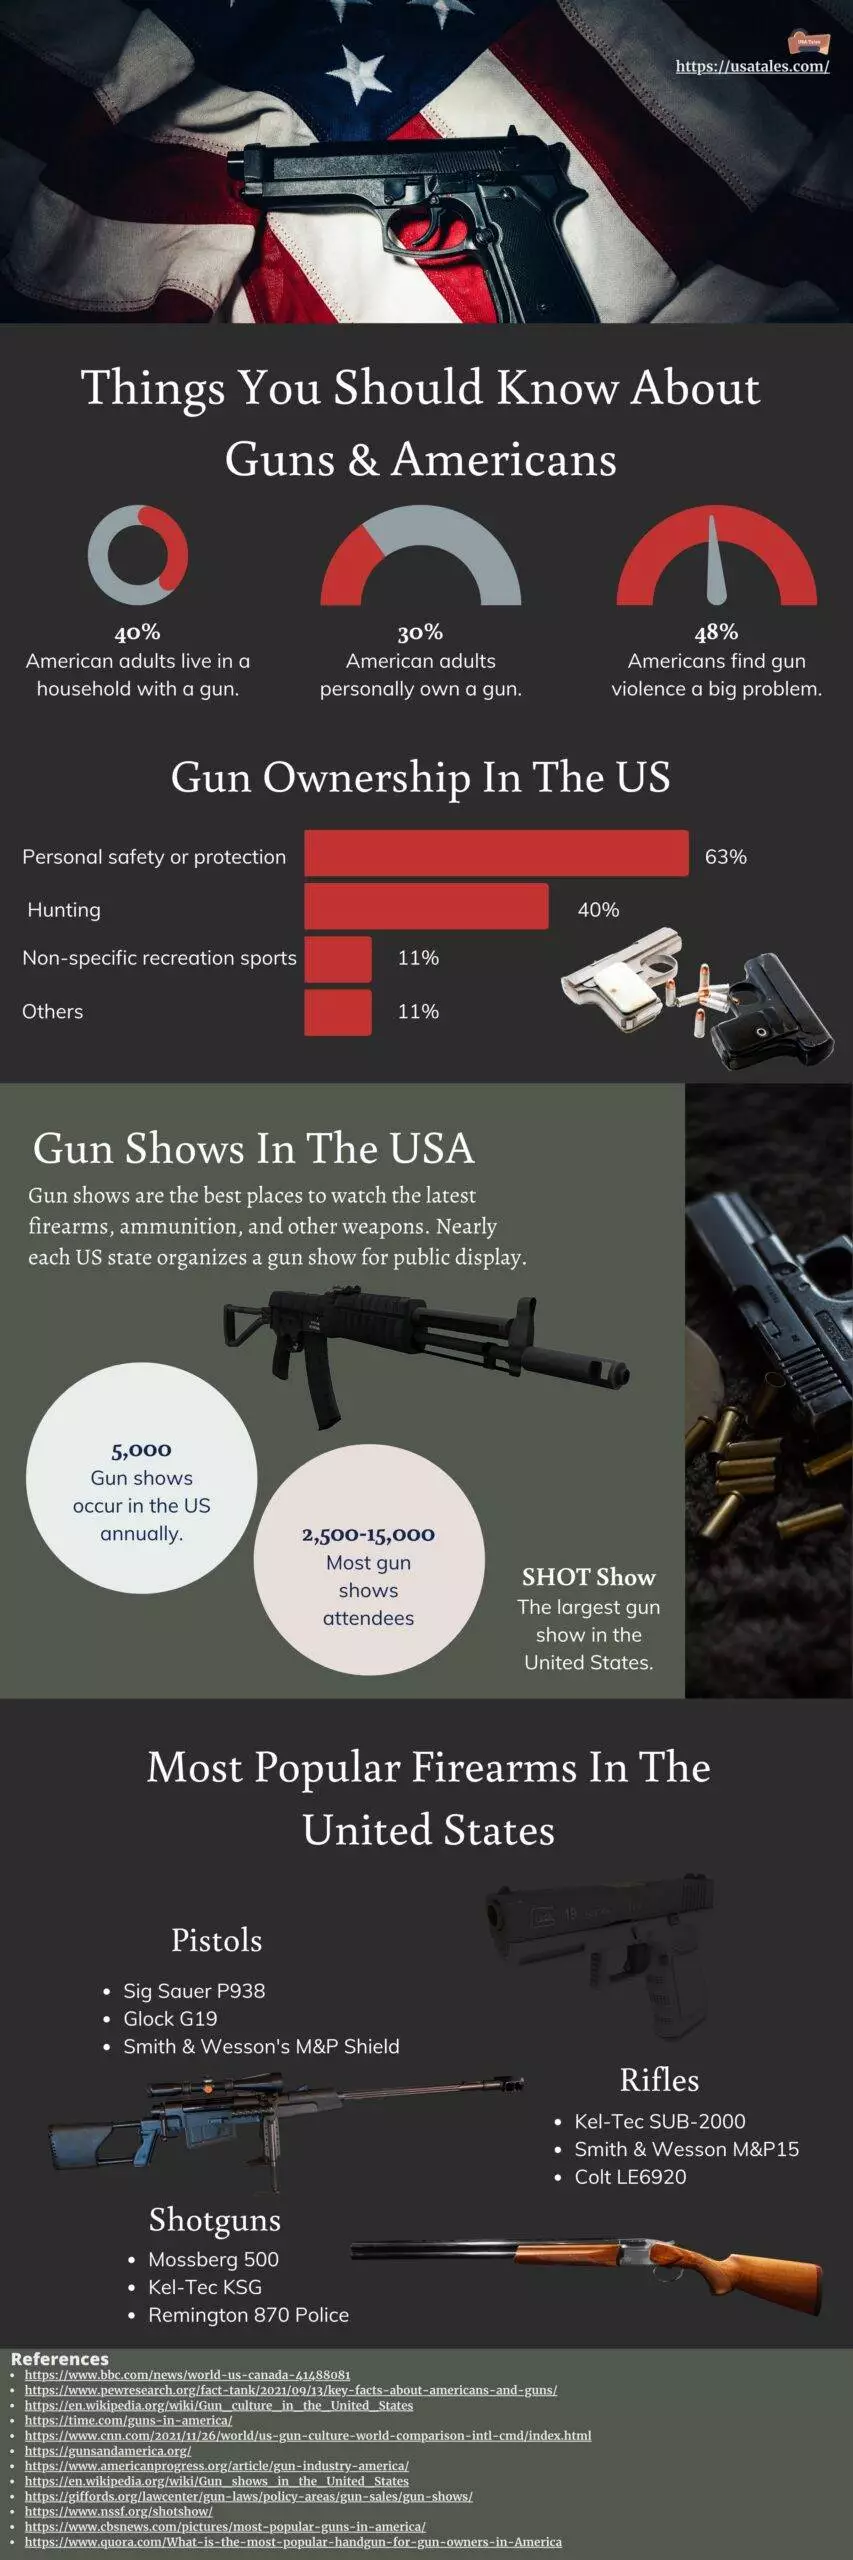 Things You Should Know About Guns & Americans